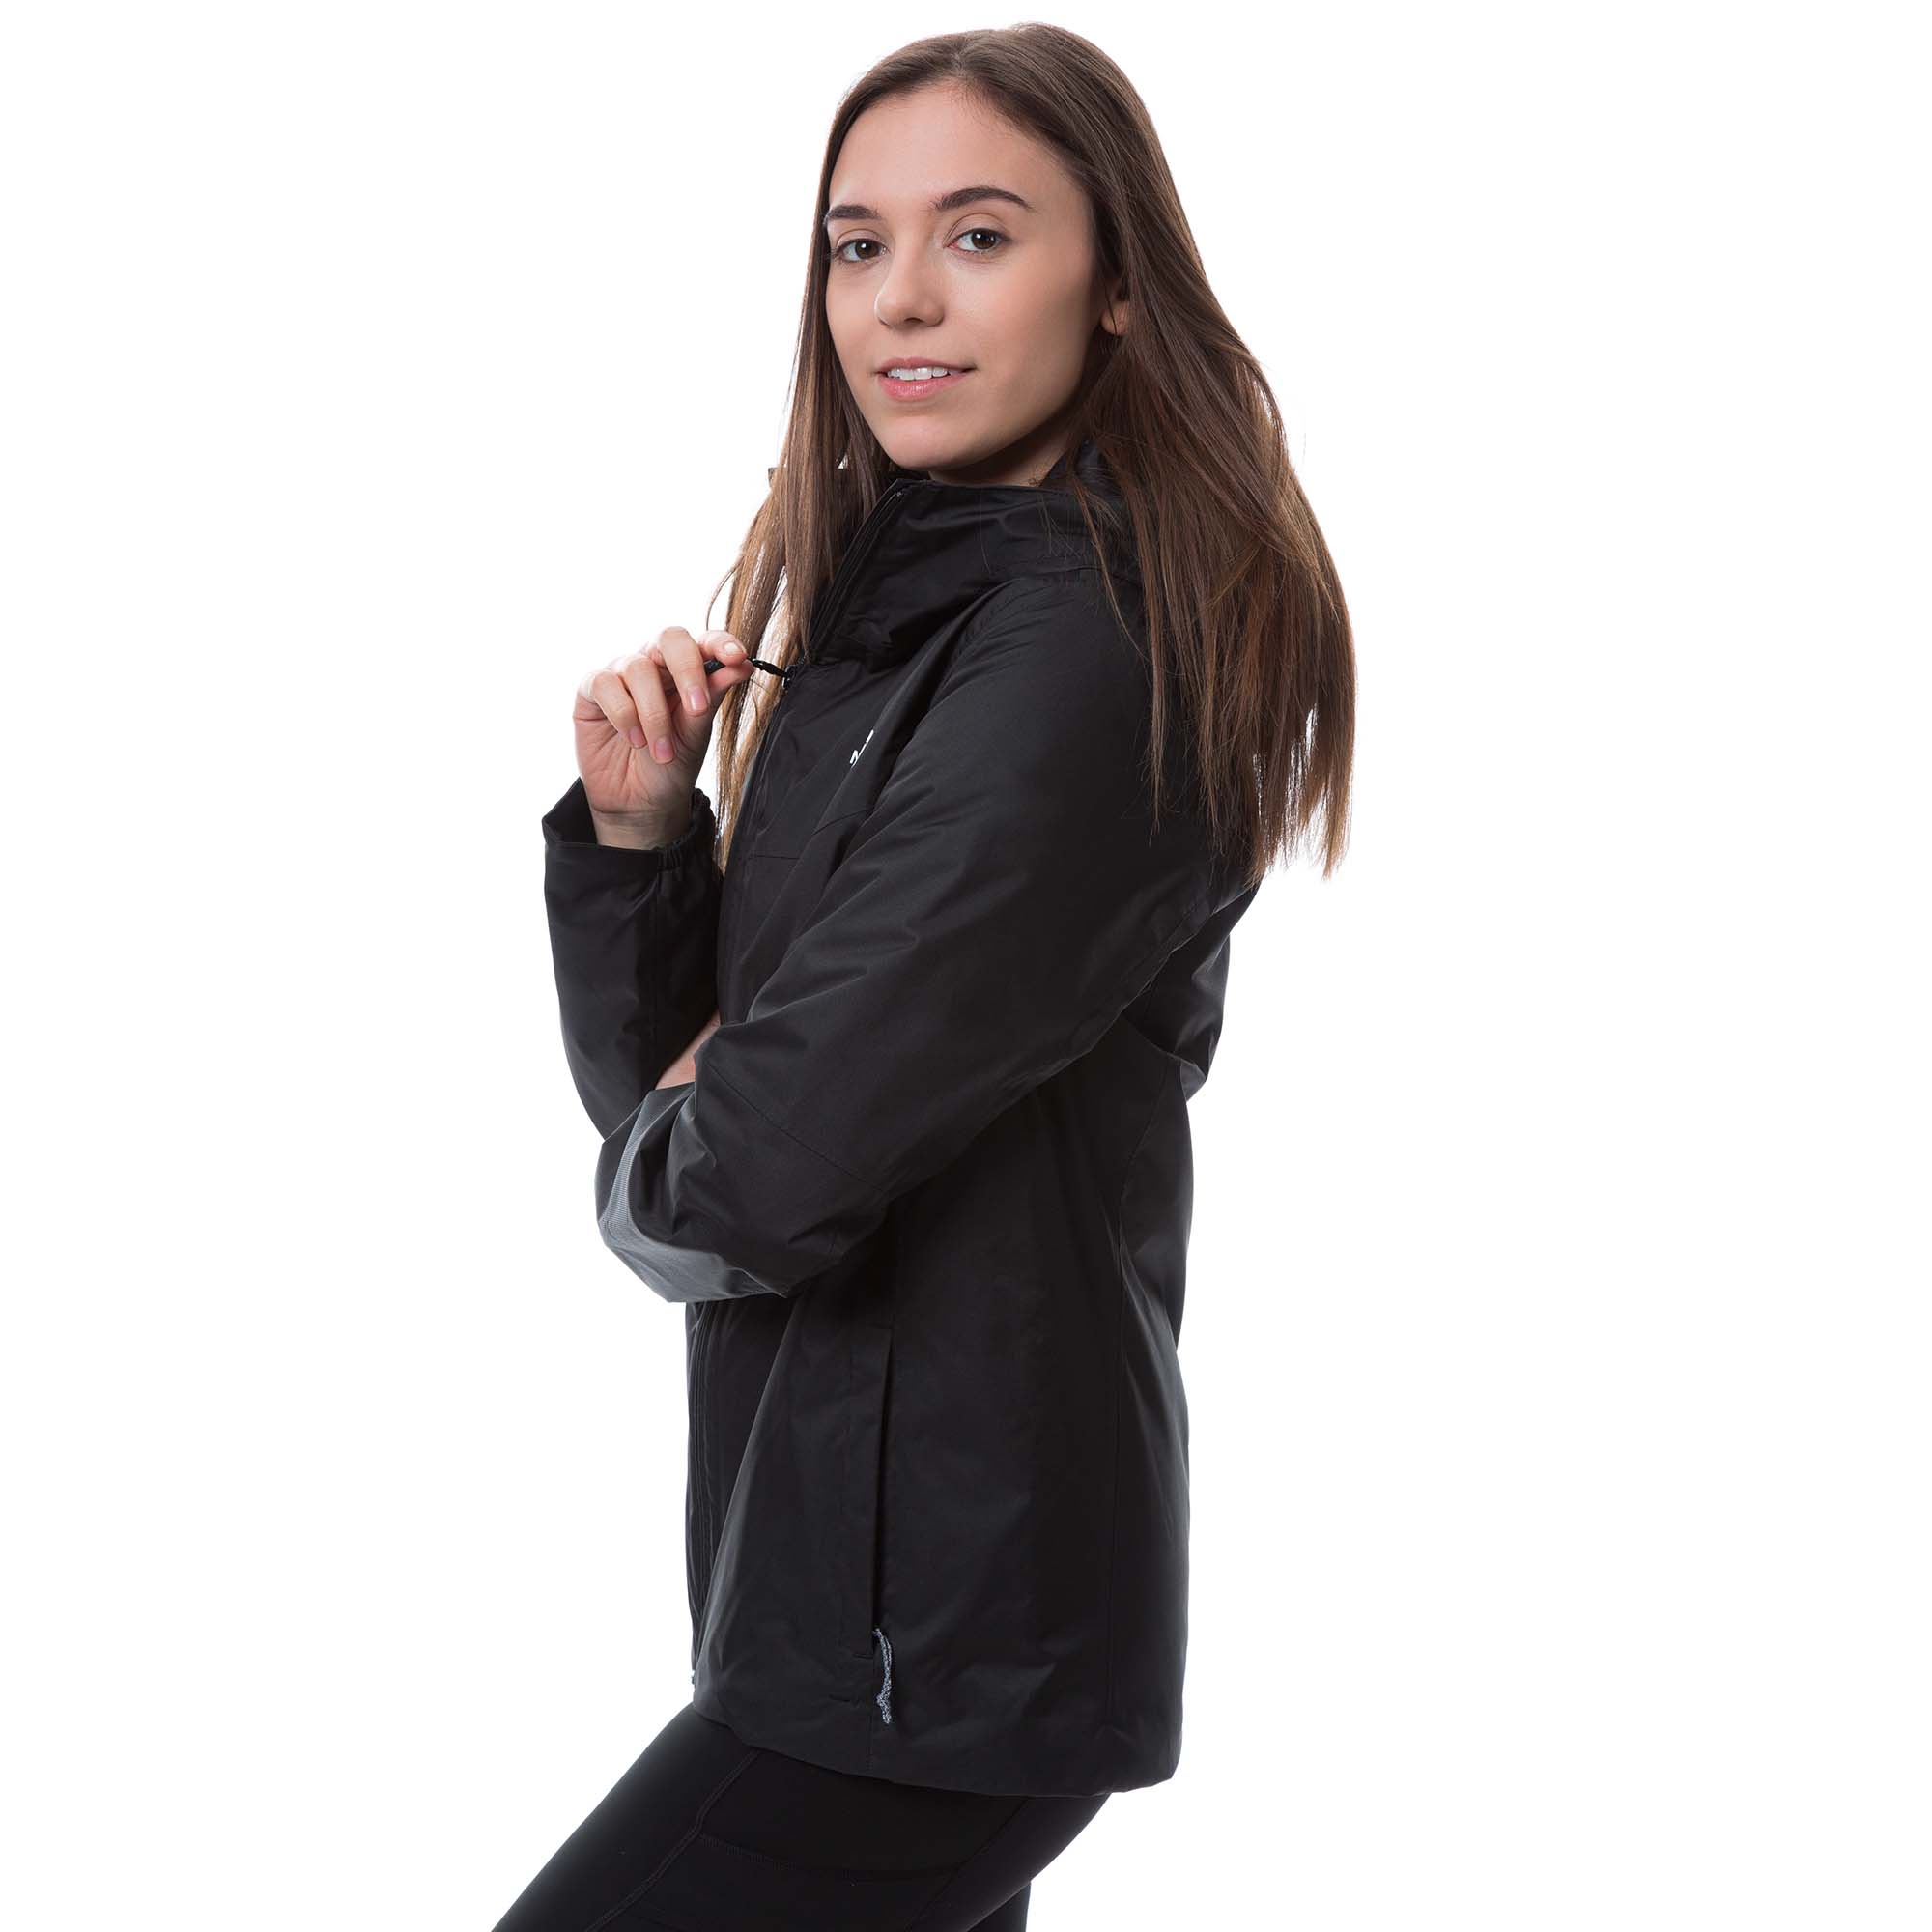 The North Face Quest Women's Insulated Jacket